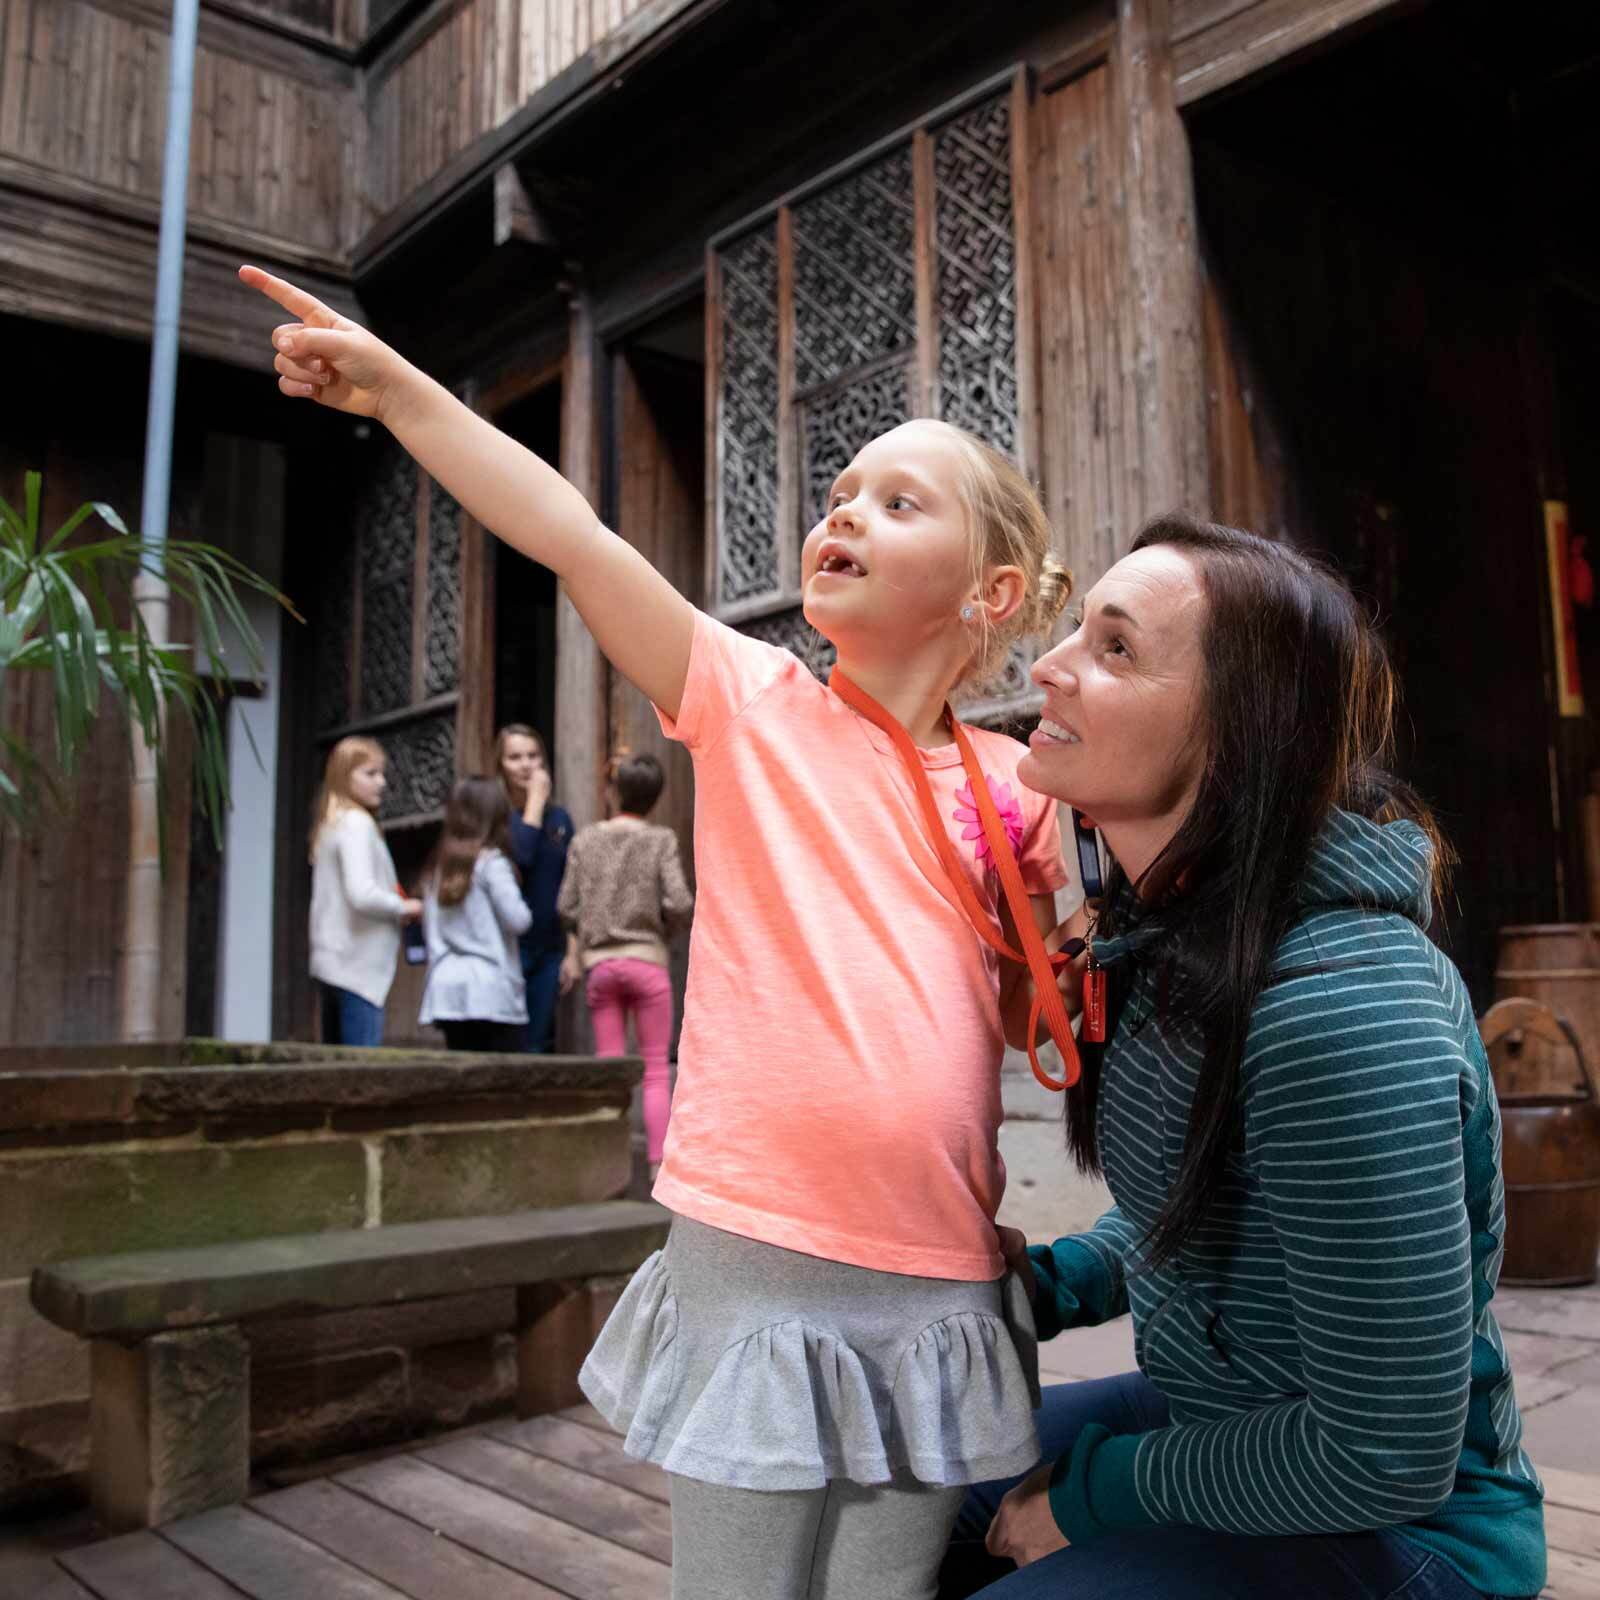 A young kid showing her engaged mom something fascinating during their family outing at a classic courtyard.